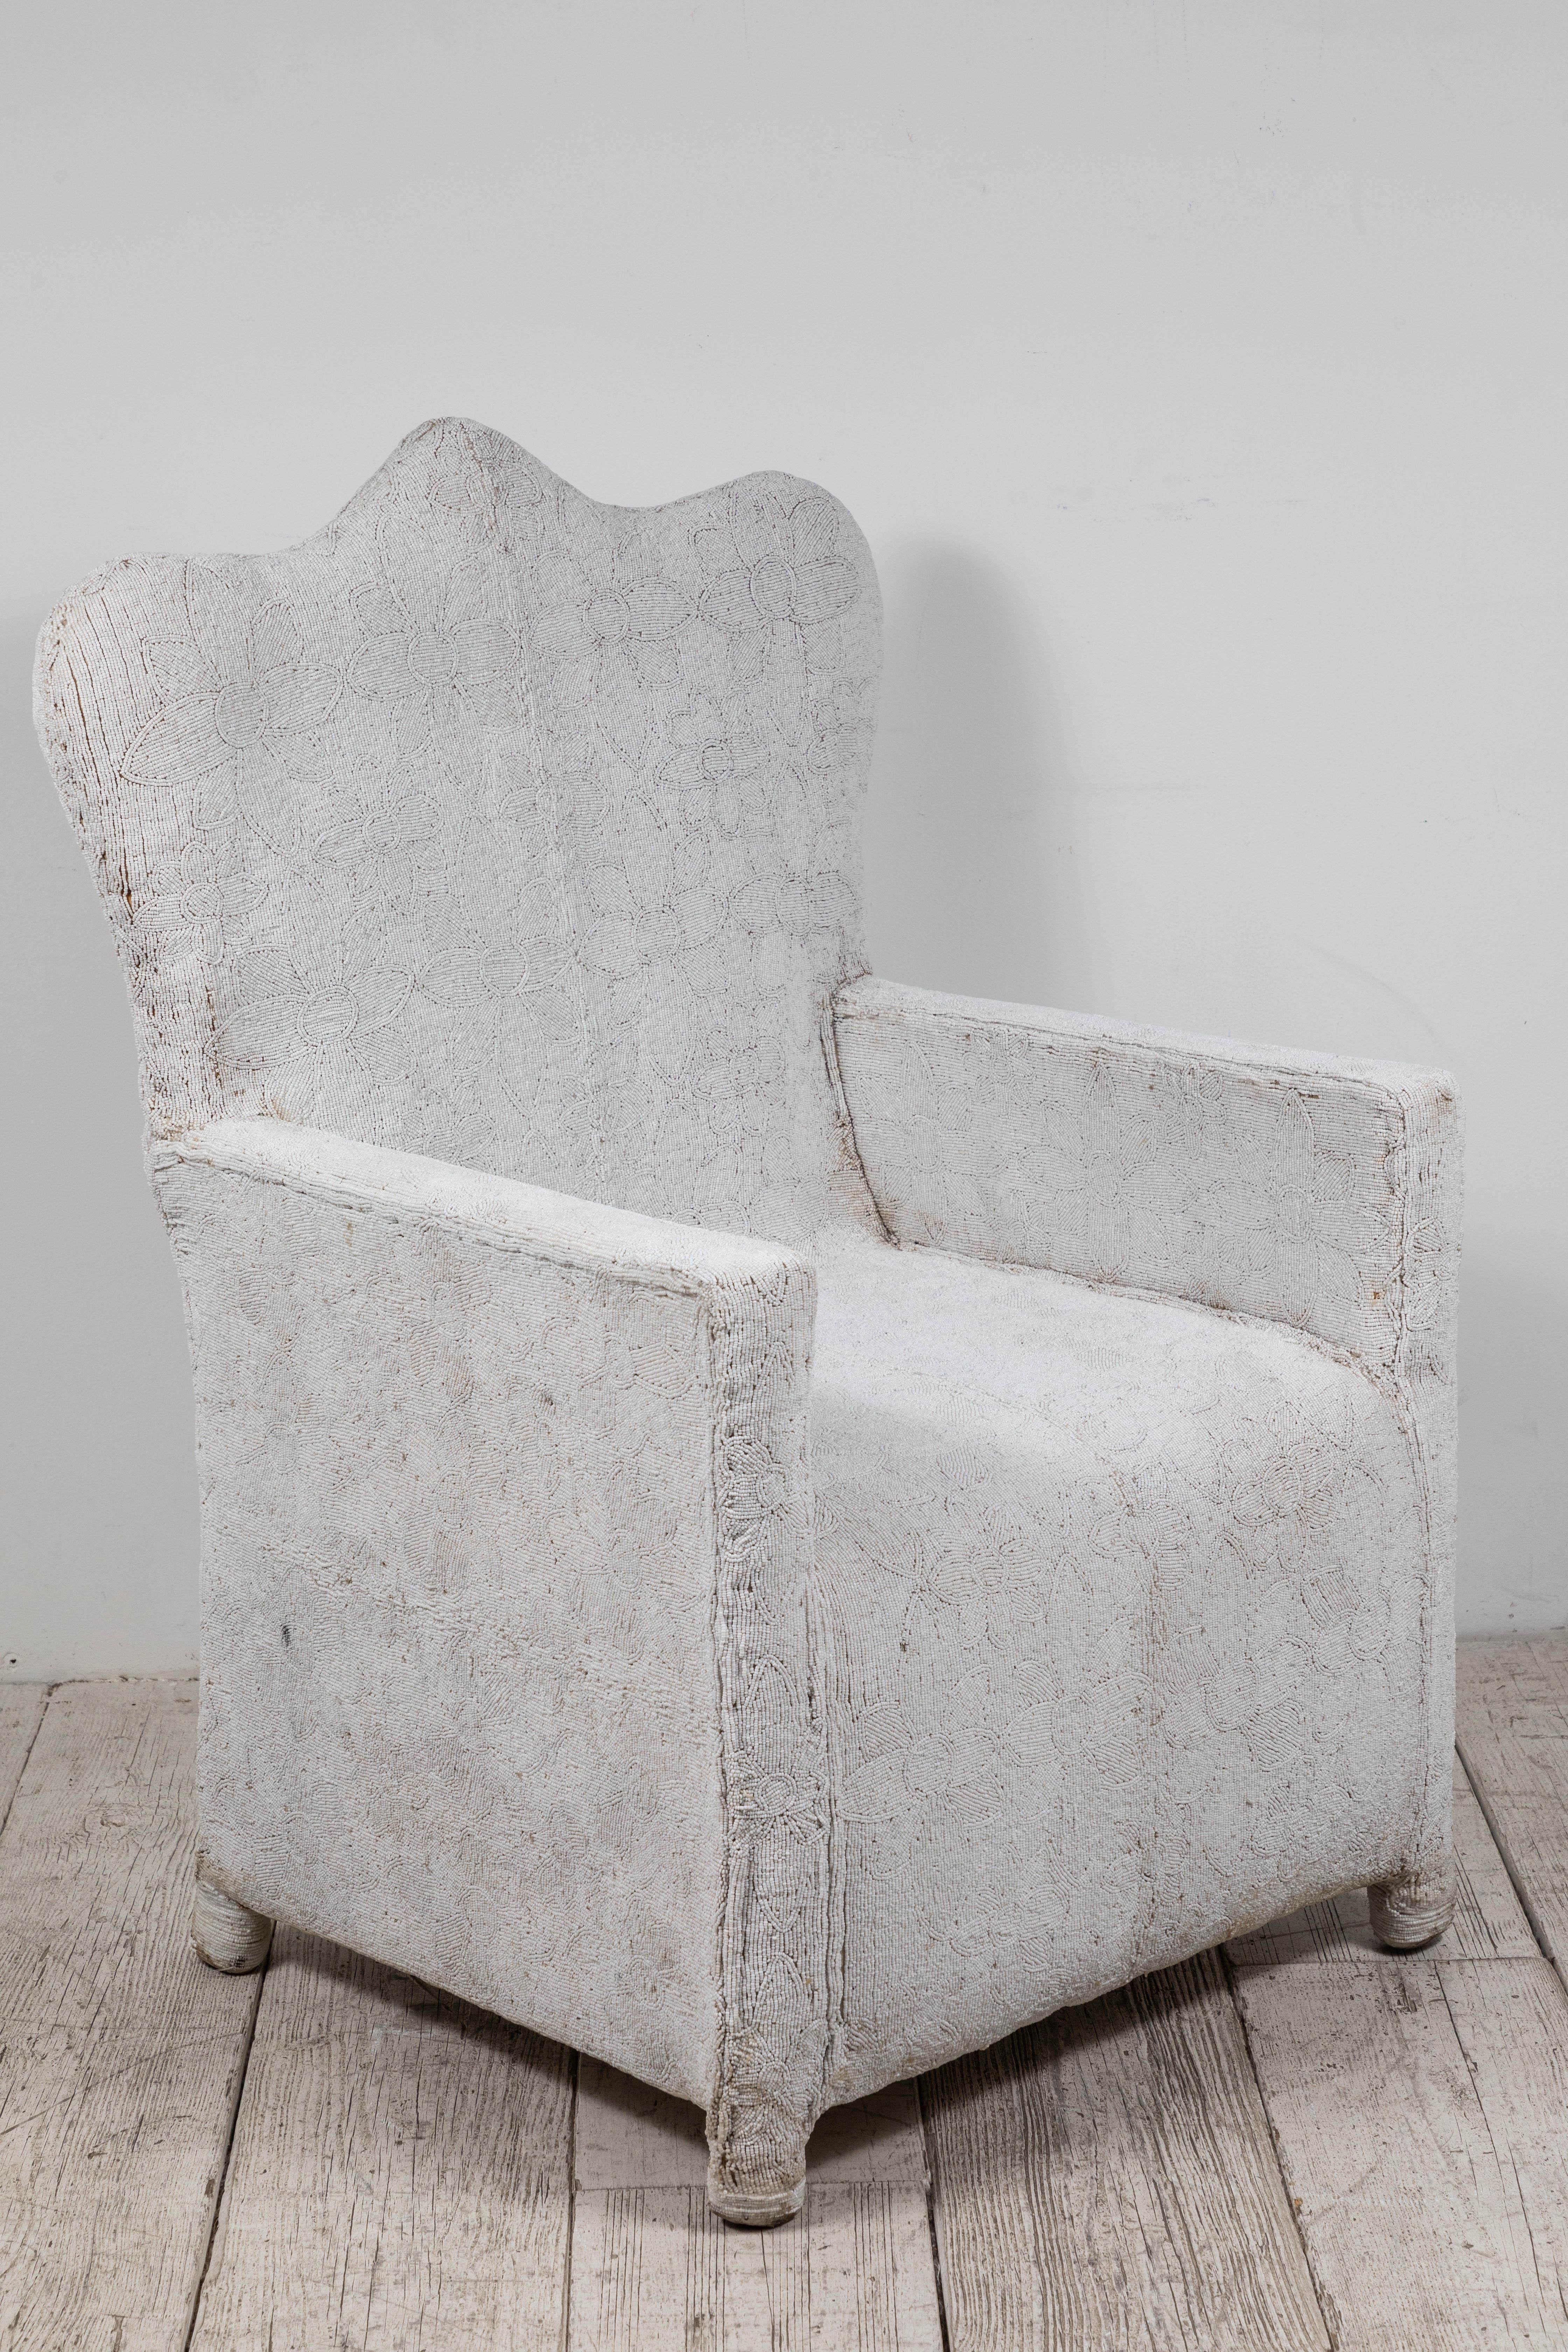 Rare African beaded chair from Nigeria. Meticulously assembled by hand in Nigeria using all white beads over a canvas and wood frame. Each chair is one-of-a-kind and exceptionally un-common.